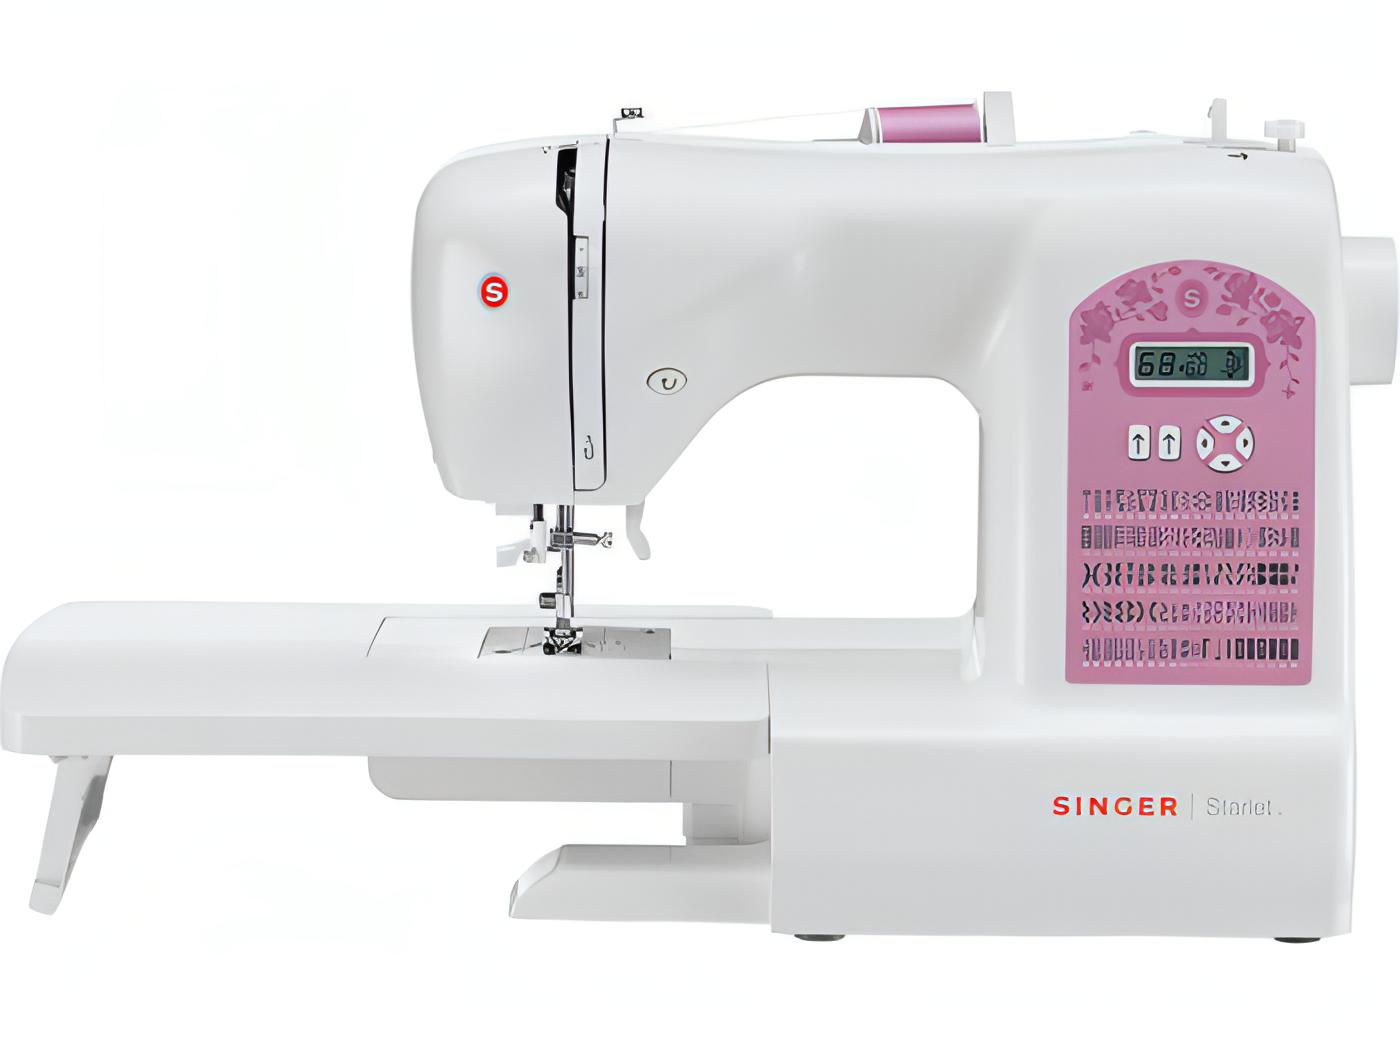 Singer Starlet 6699 Sewing Machine Inc. Extension Table - Good as New